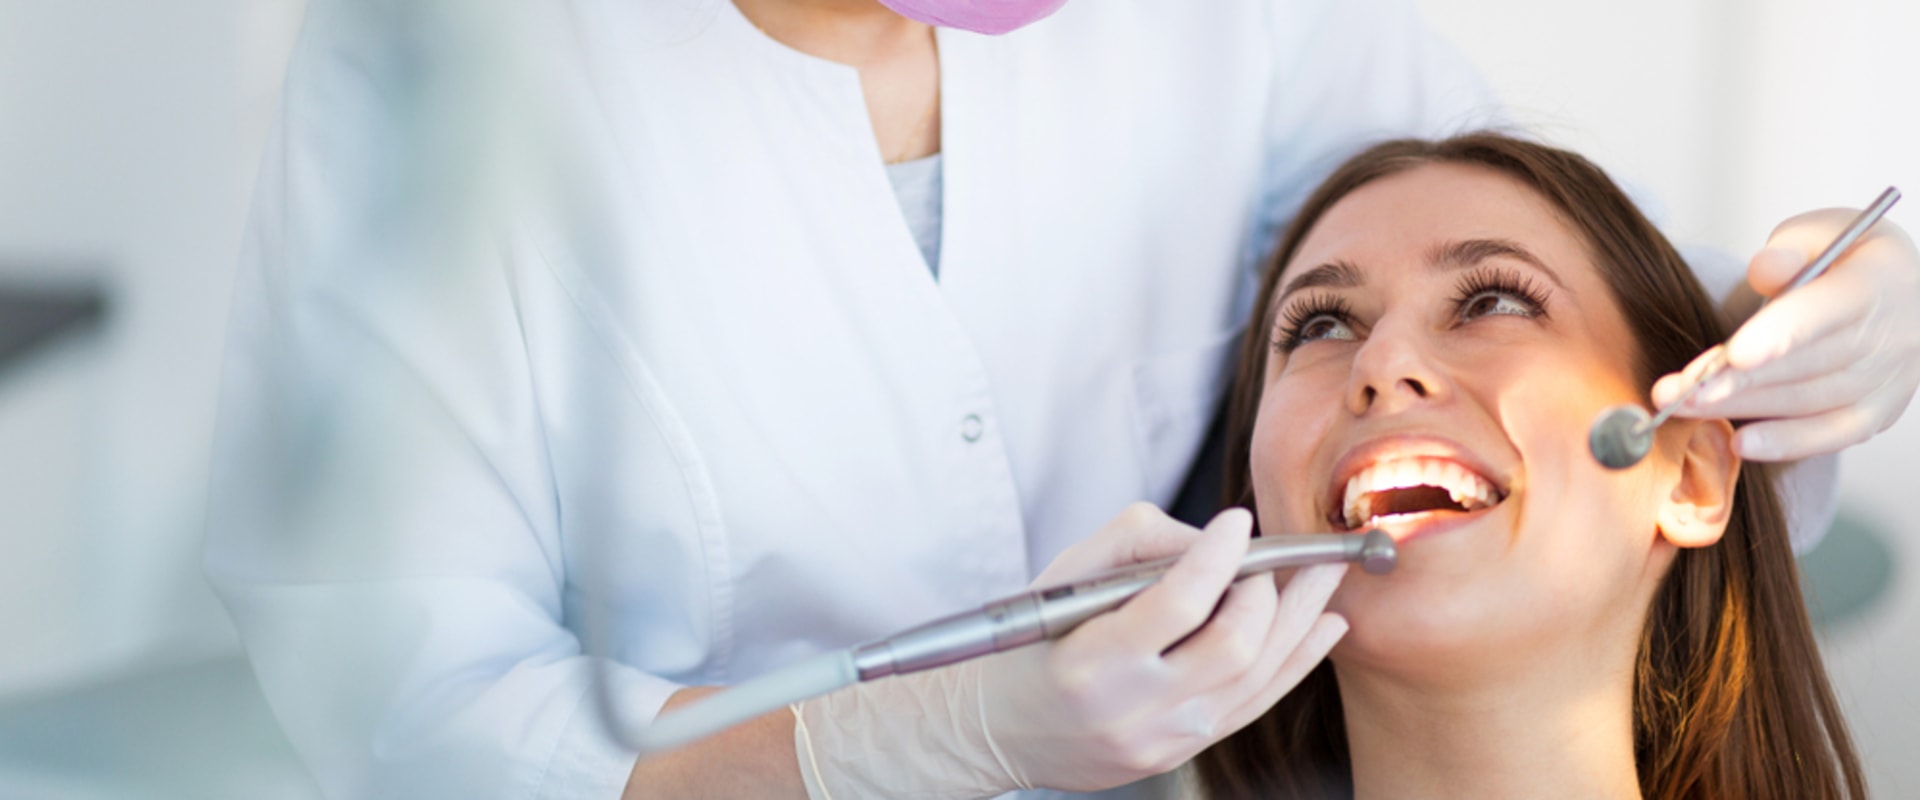 Texas Dentist: How To Prepare For Dental Implant Surgery